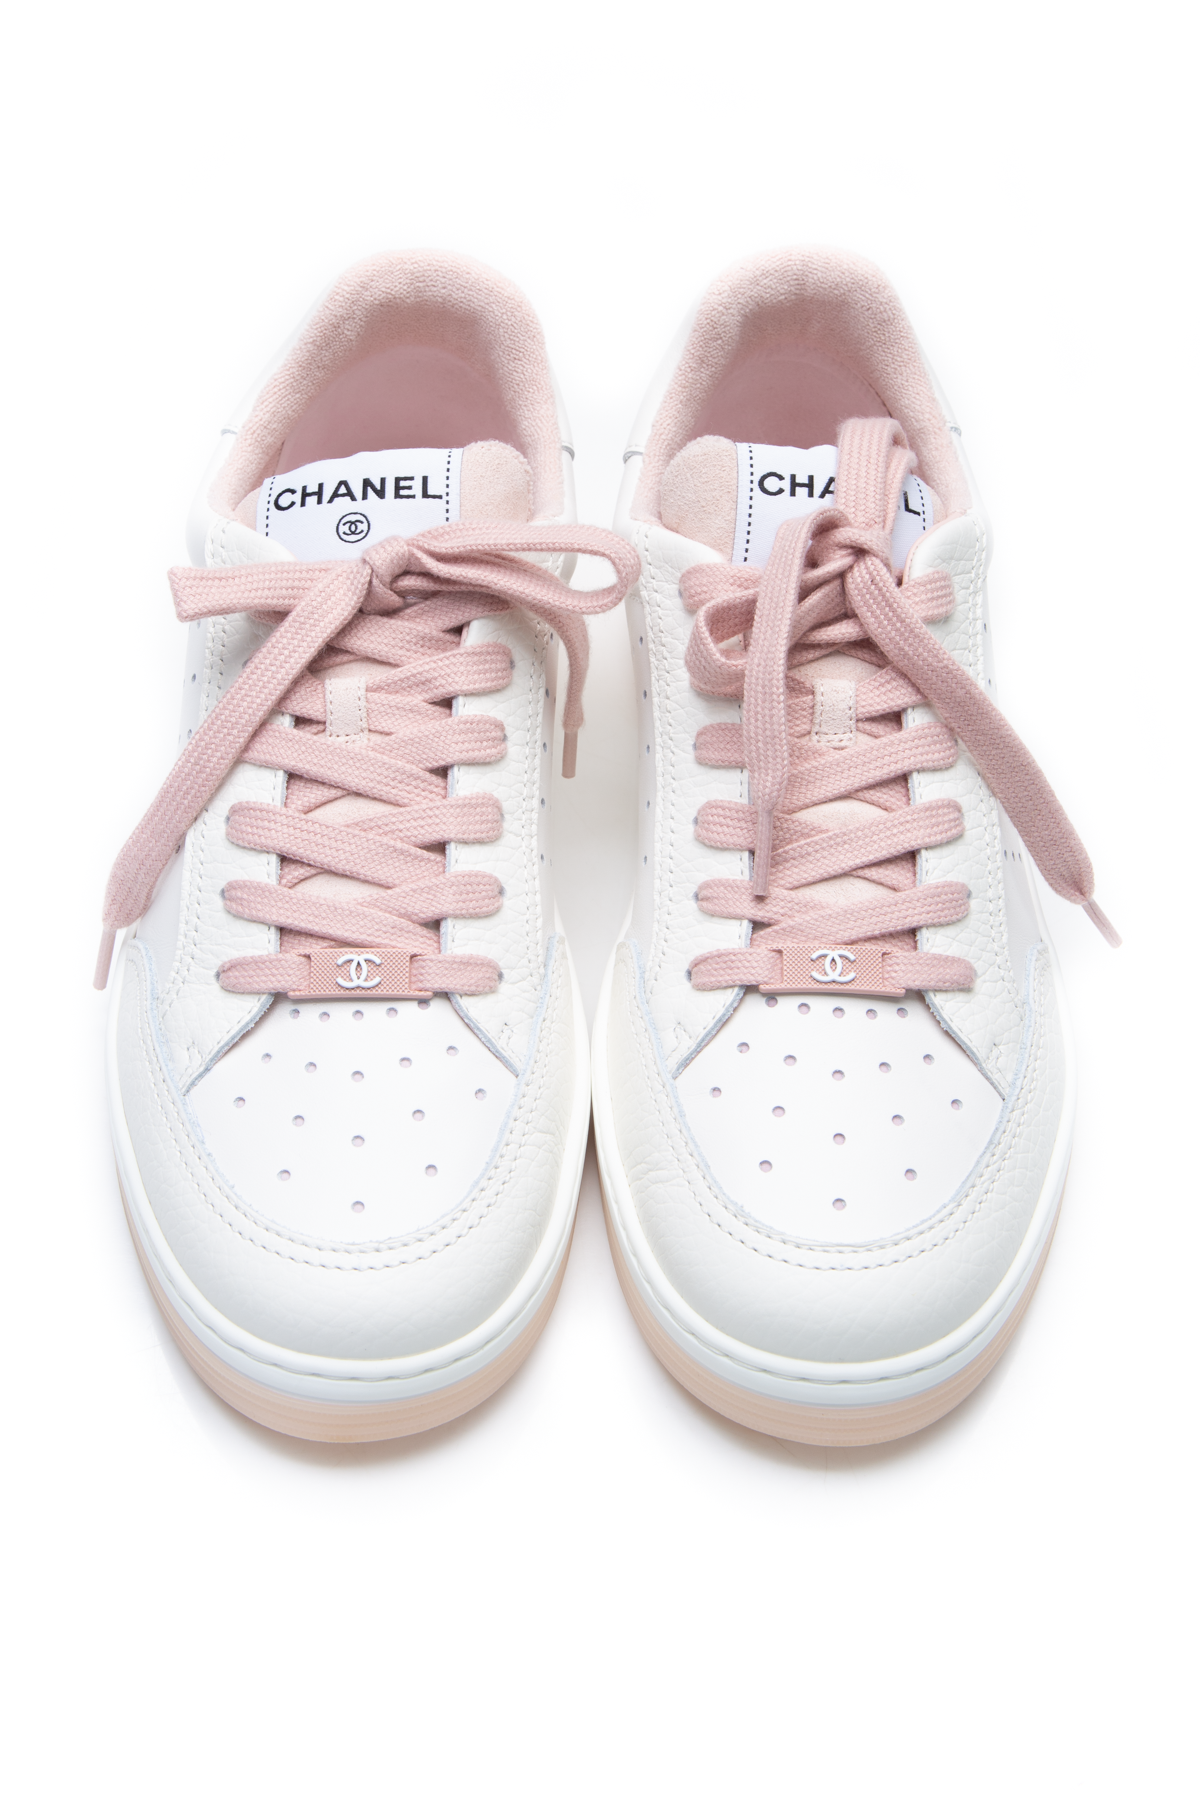 Chanel Logo Low Top Sneakers - Size 41 Couture USA